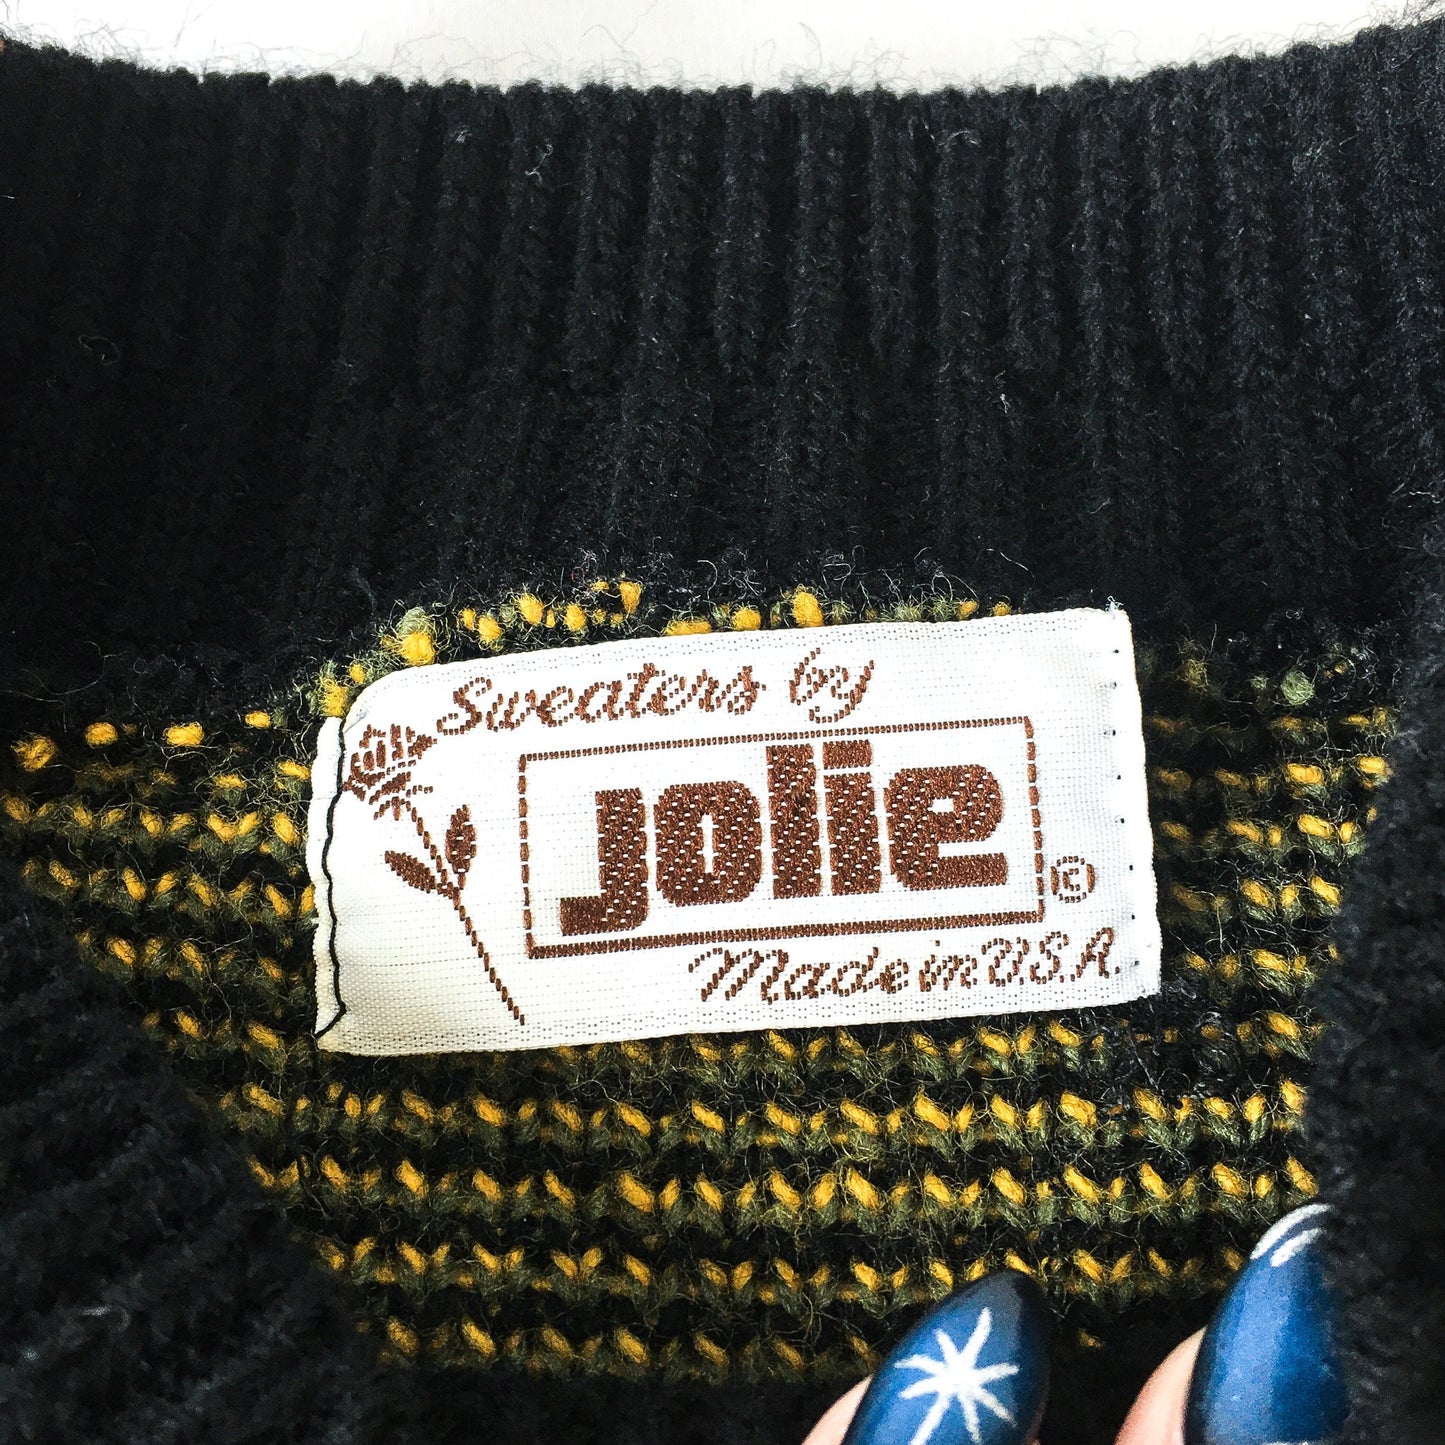 Vintage 80s Sweaters By Jolie Green and Yellow Abstract Patterned Knit Sweater, Made in USA